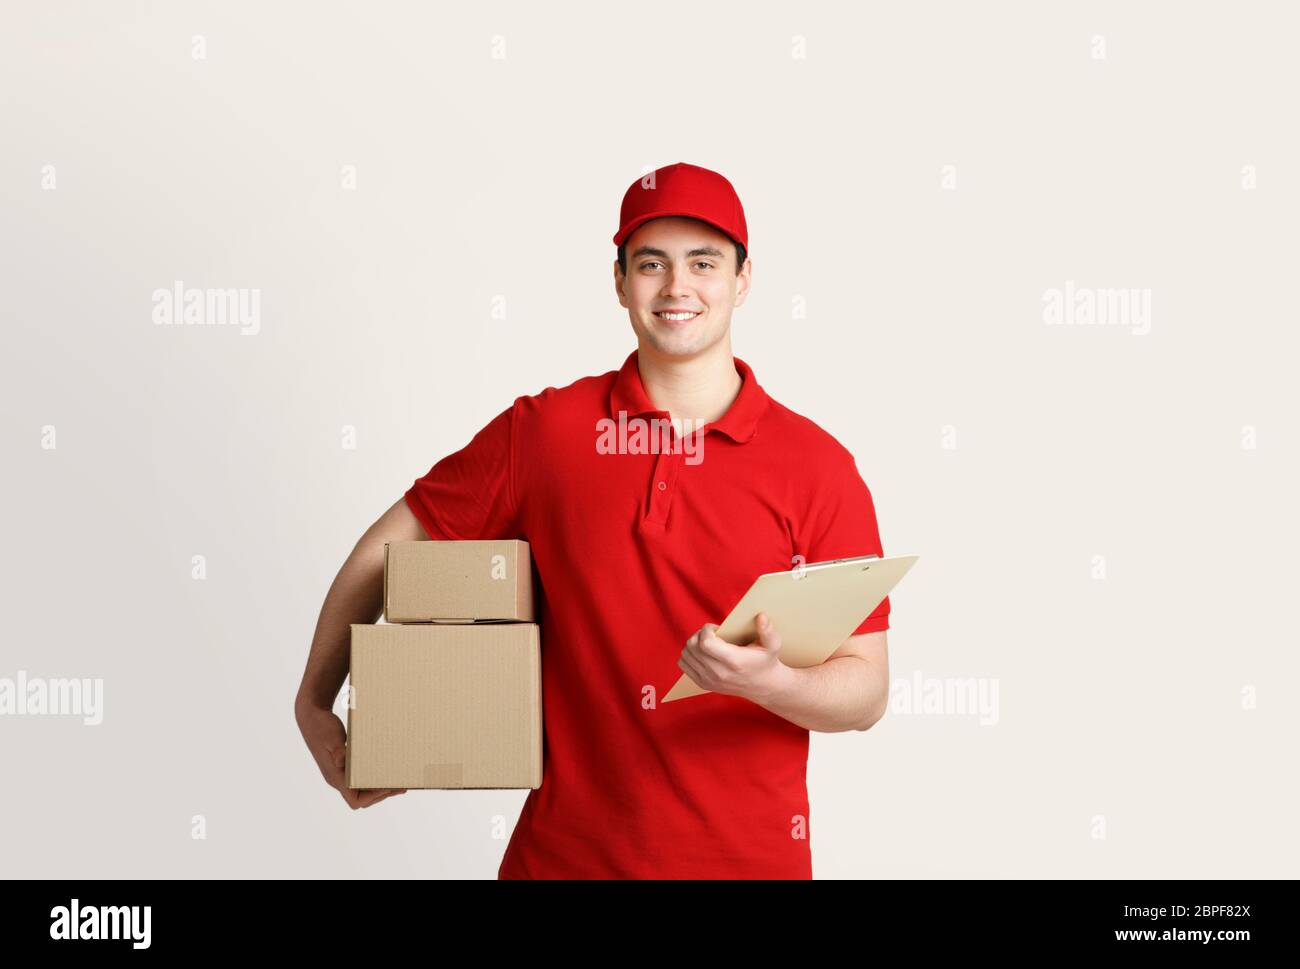 Home delivery with courier. Delivery man holds cardboard boxes and tablet Stock Photo